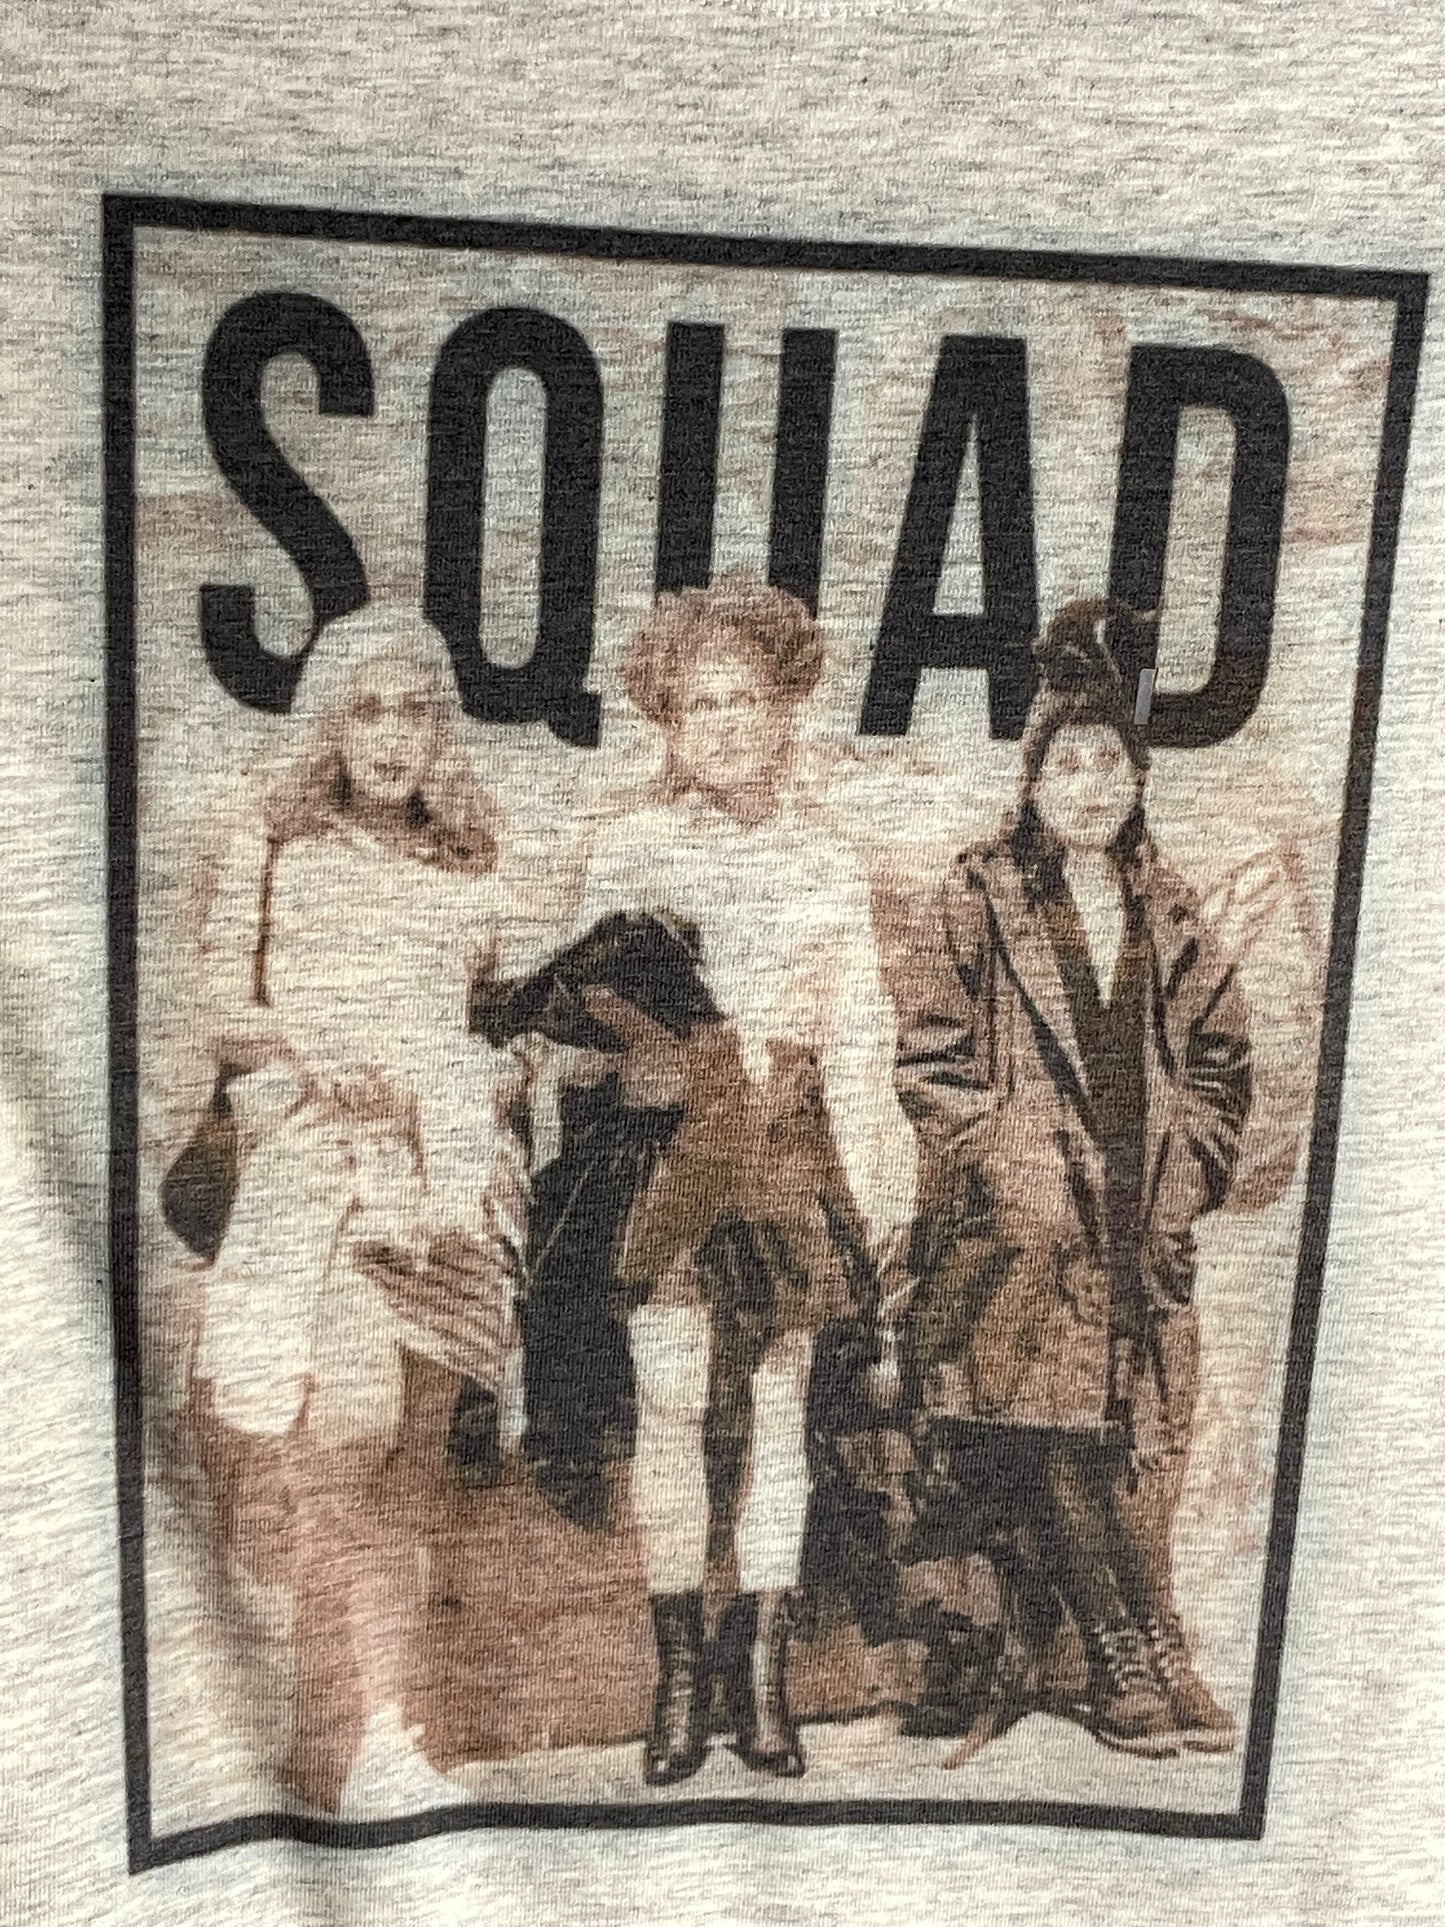 Witch Squad T-Shirt• Printed by Gothic Hippies